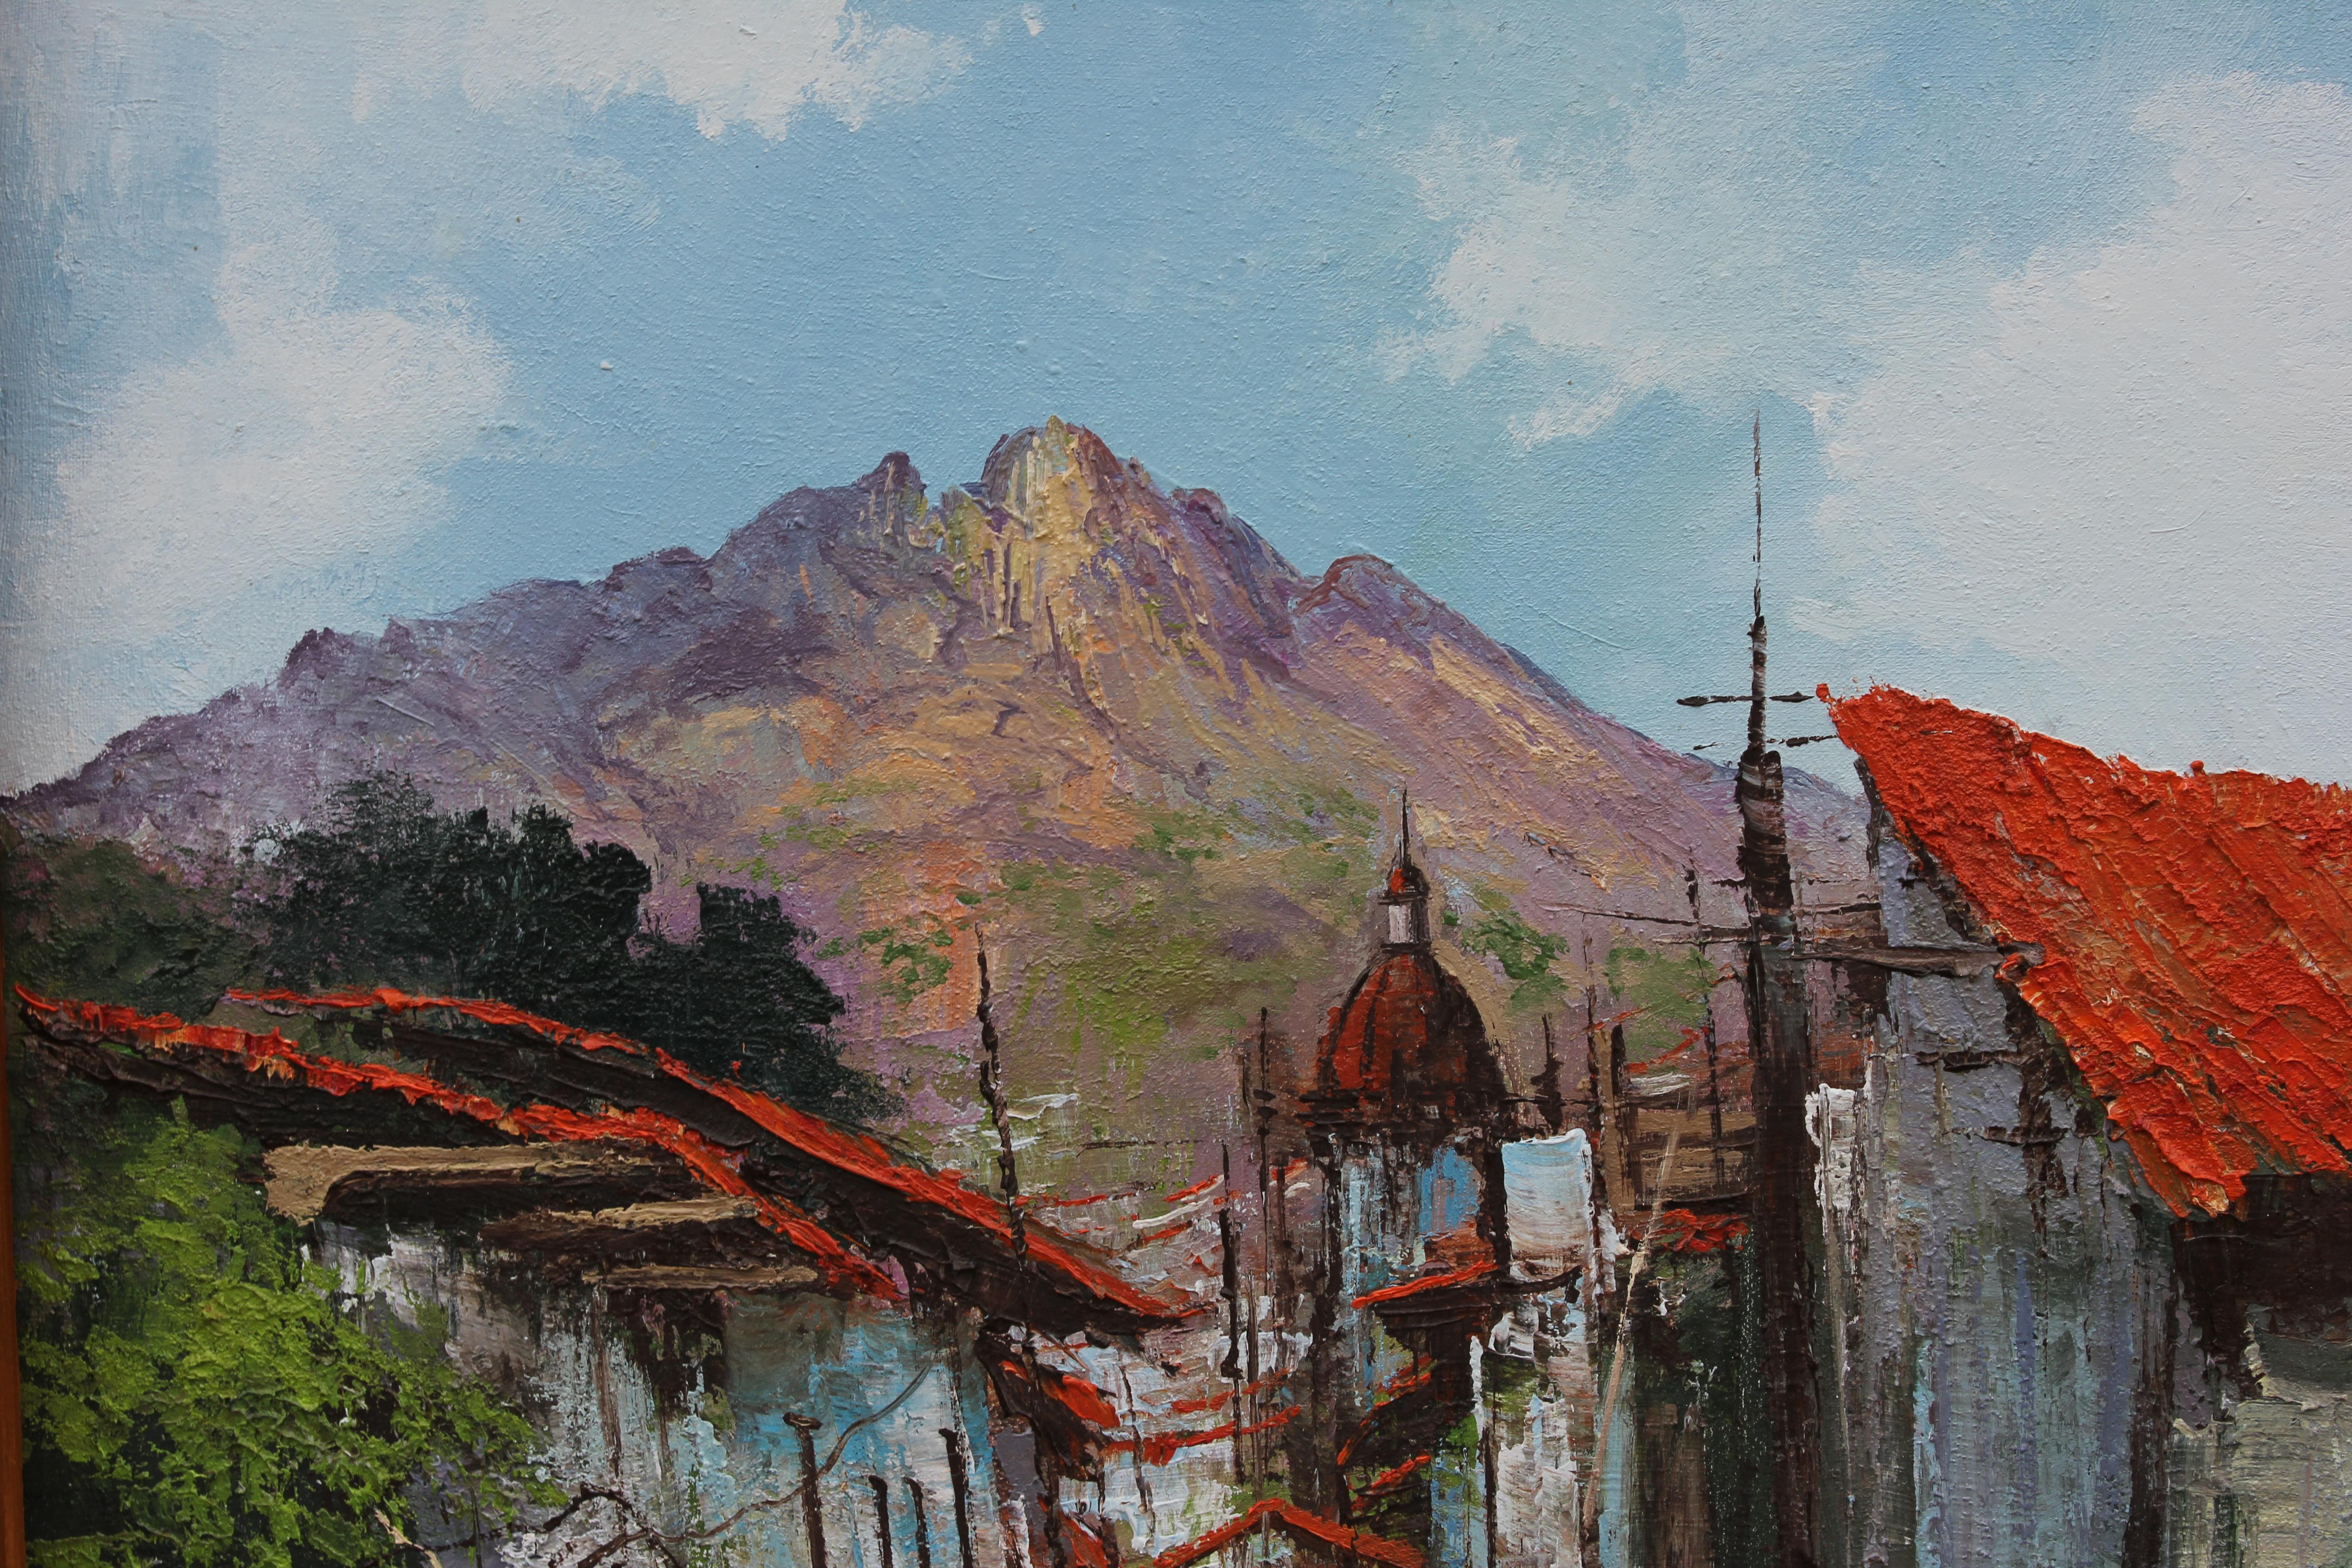 South American Landscape View of a Town - Brown Figurative Painting by Unknown